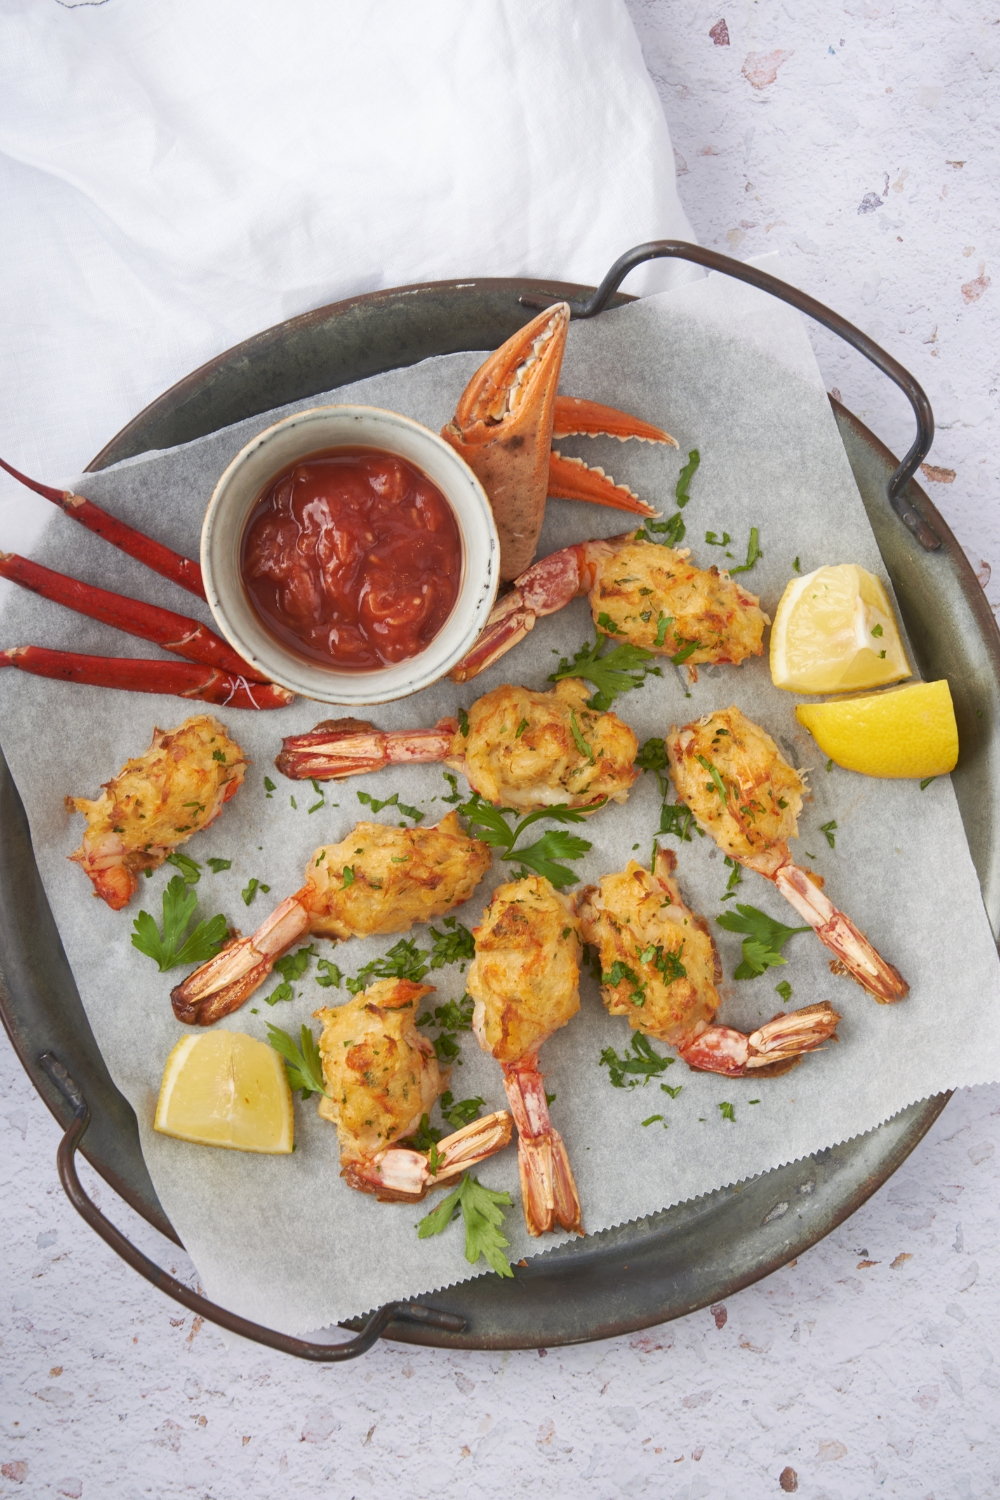 A pan lined with parchment paper filled with baked shrimp stuffed with crab meat. Surrounded the shrimp are lemon wedges, fresh herbs, a bowl of cocktail sauce, and a crab claw.